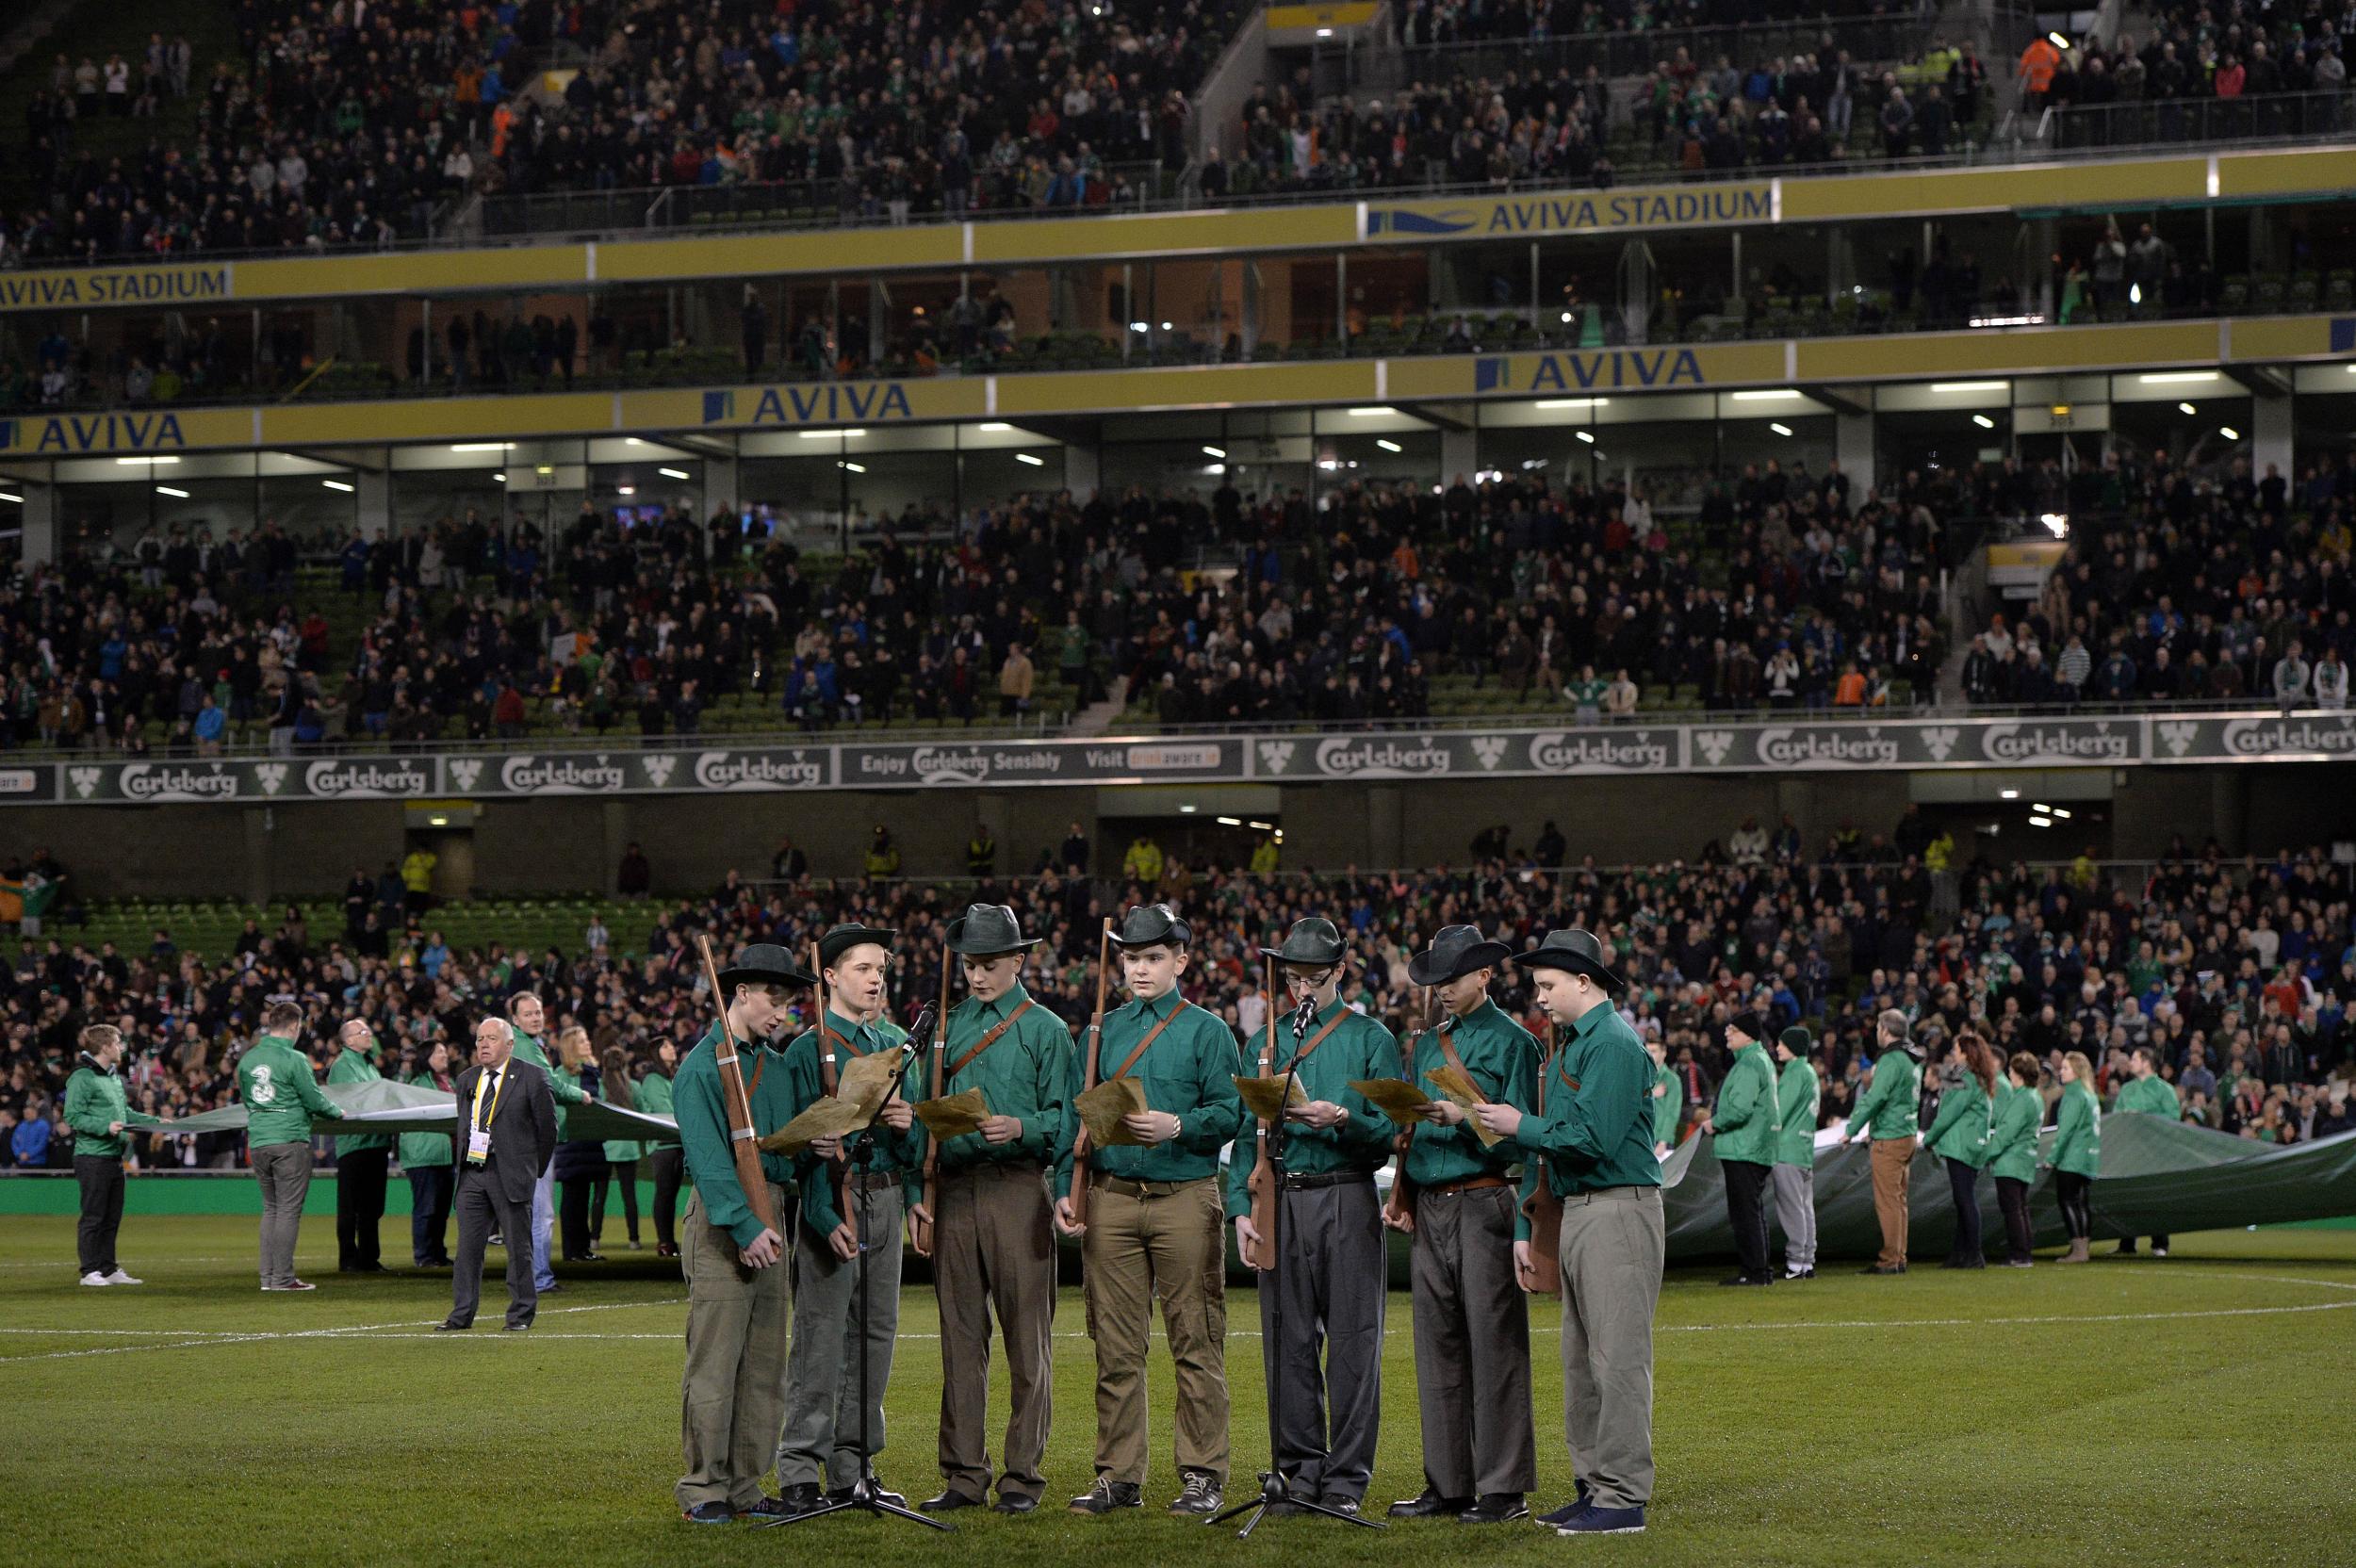 Ireland commemorated the Easter Rising during a friendly against Switzerland